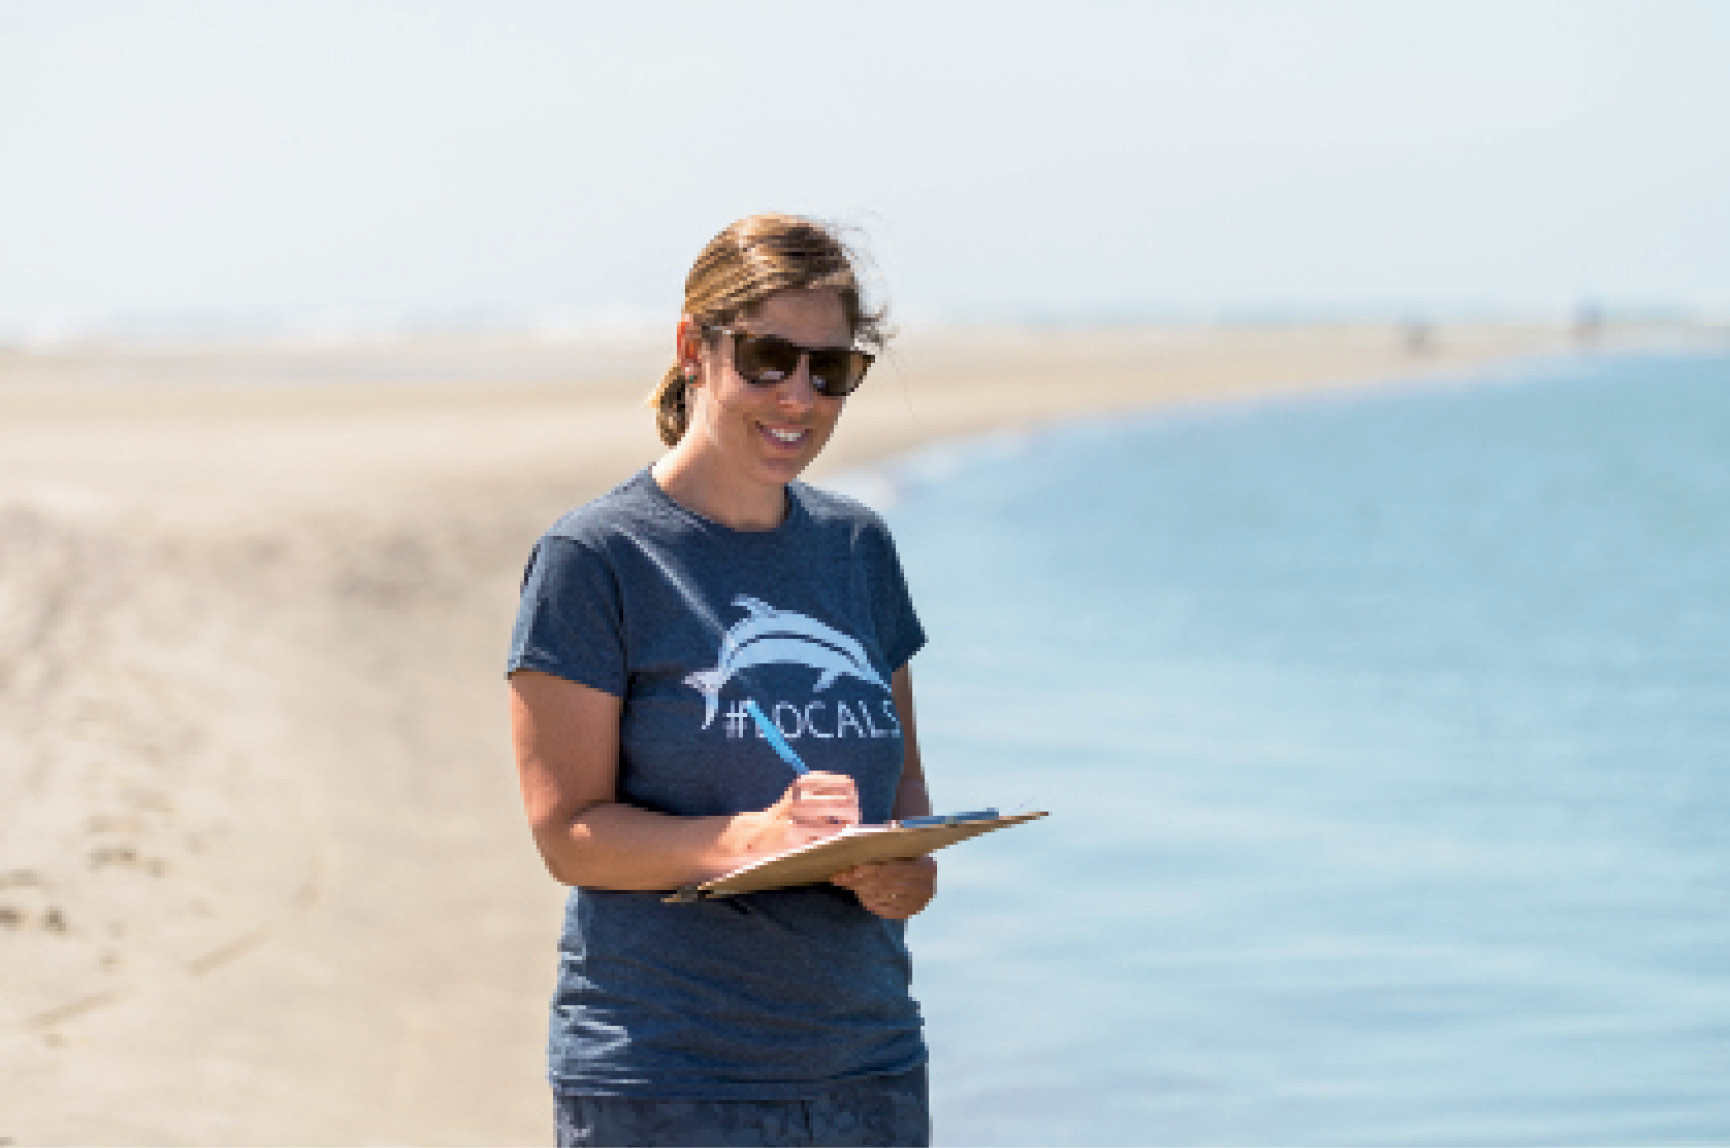 Dolphin Dame: When marine biologist Lauren Rust returned to Charleston after working in marine mammal protection on the West Coast, NOAA funding was drying up, so she founded the nonprofit Lowcountry Marine Mammal Network in 2017 to extend outreach and protection efforts.